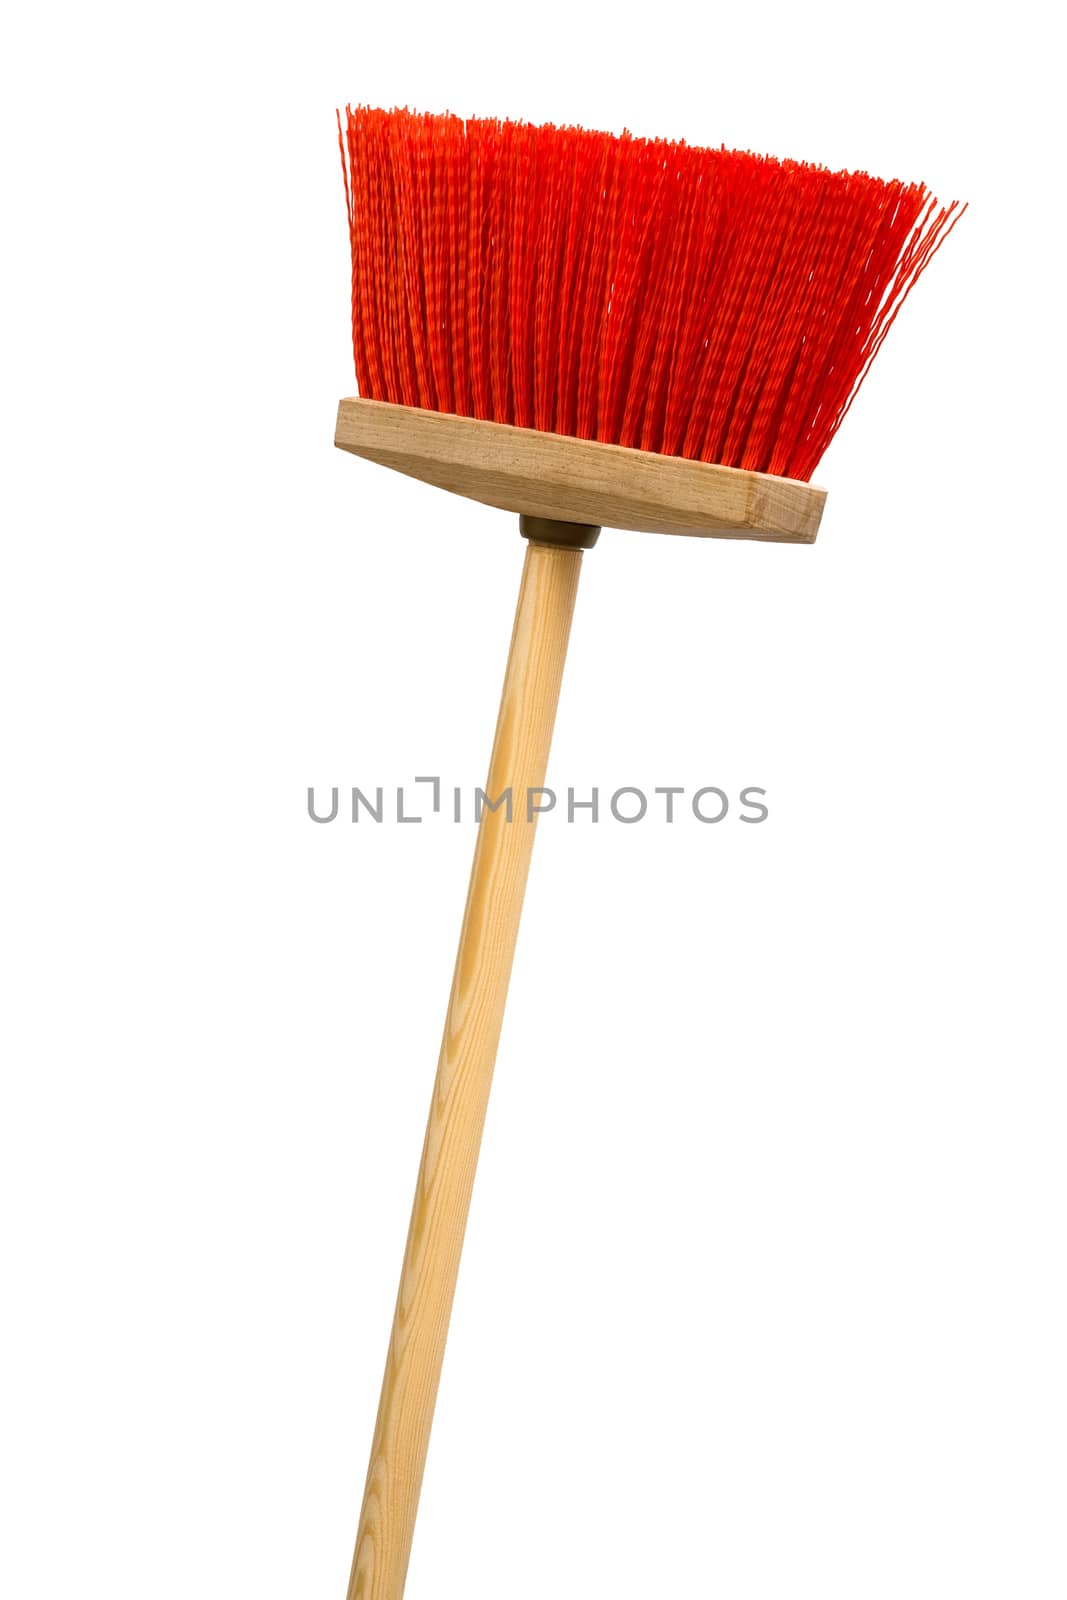 Beautiful red broom on a white background